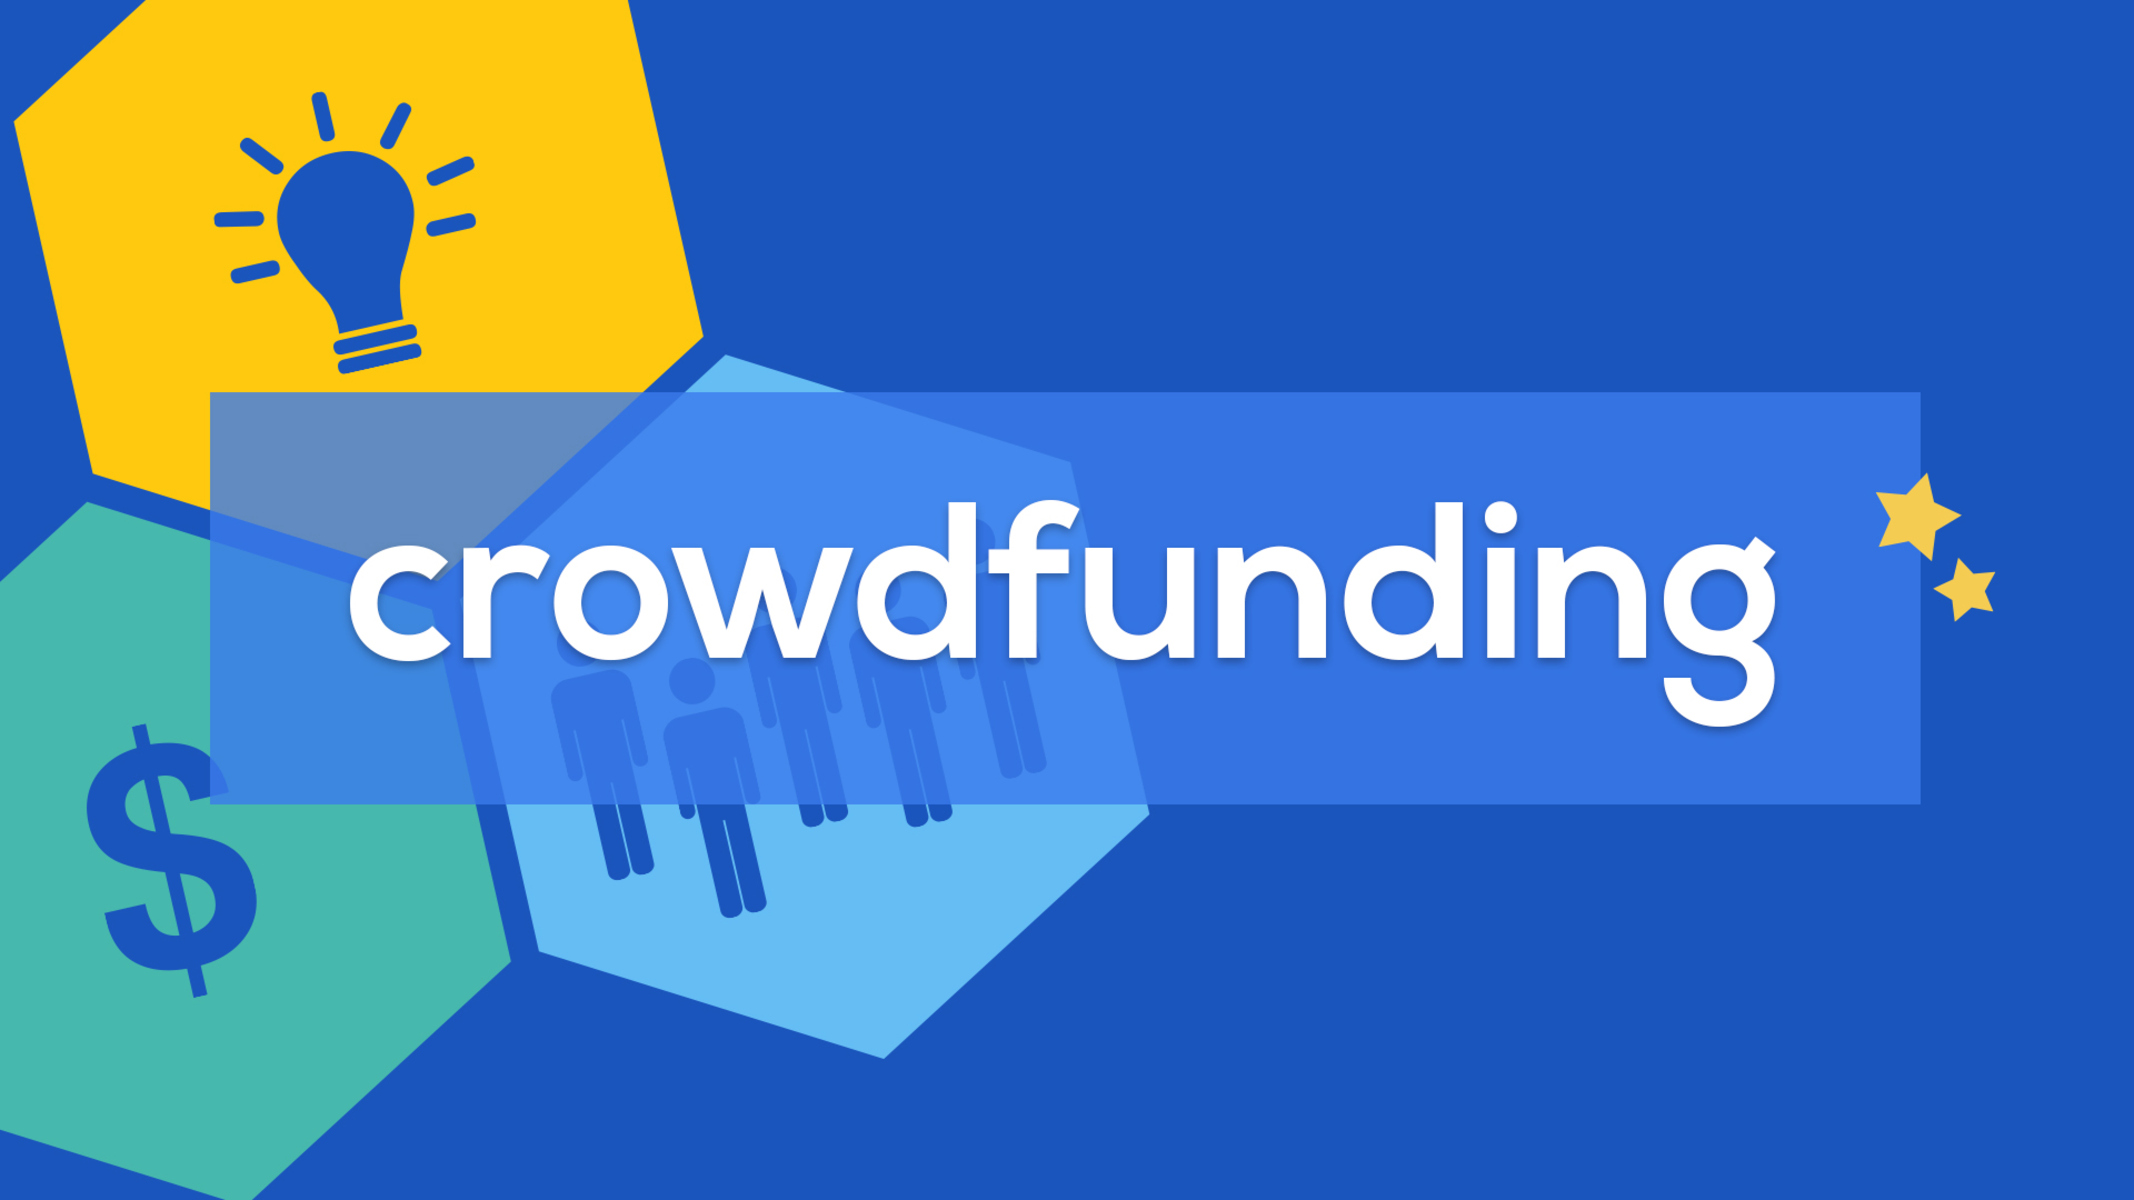 What Are The Regulations For Crowdfunding?